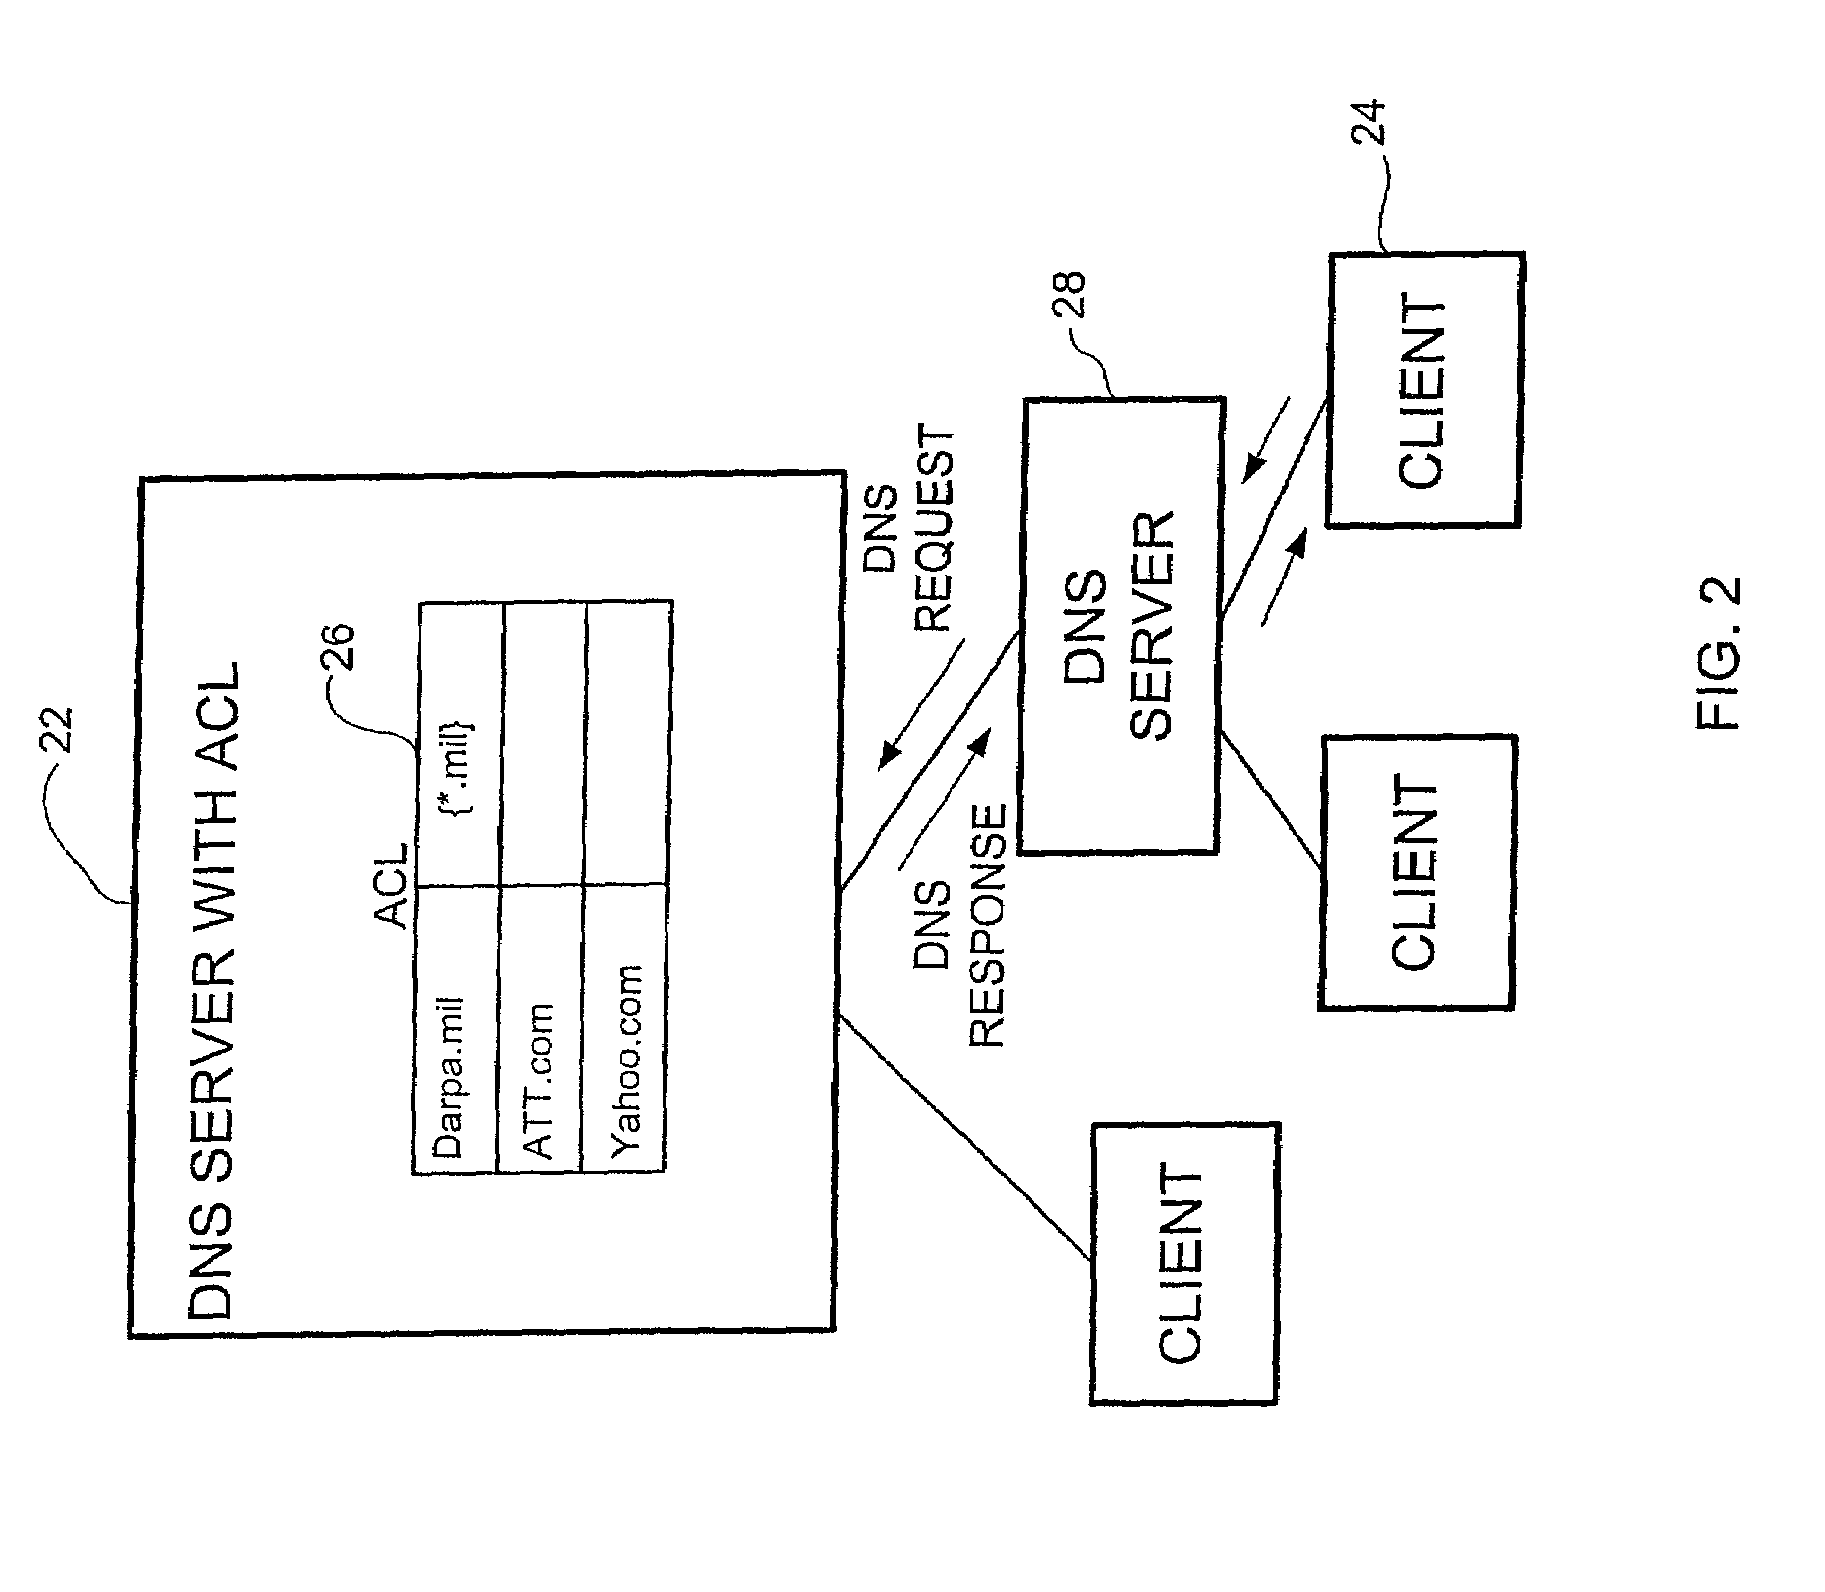 DNS server access control system and method